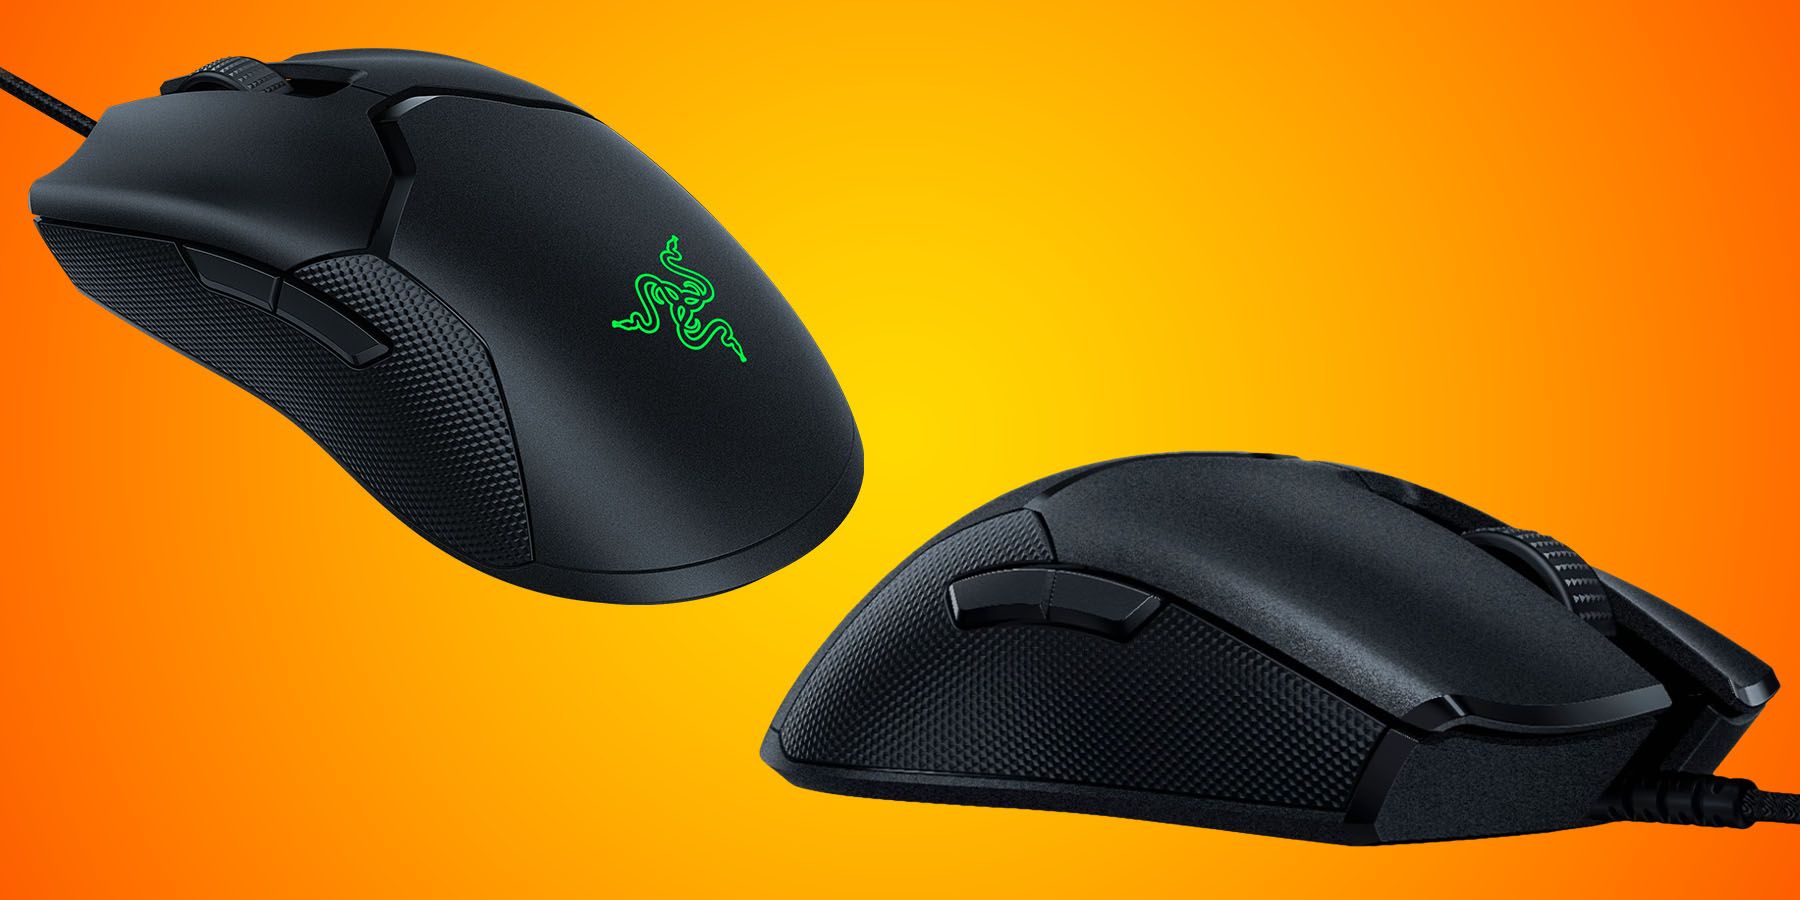 The best deals on gaming mice